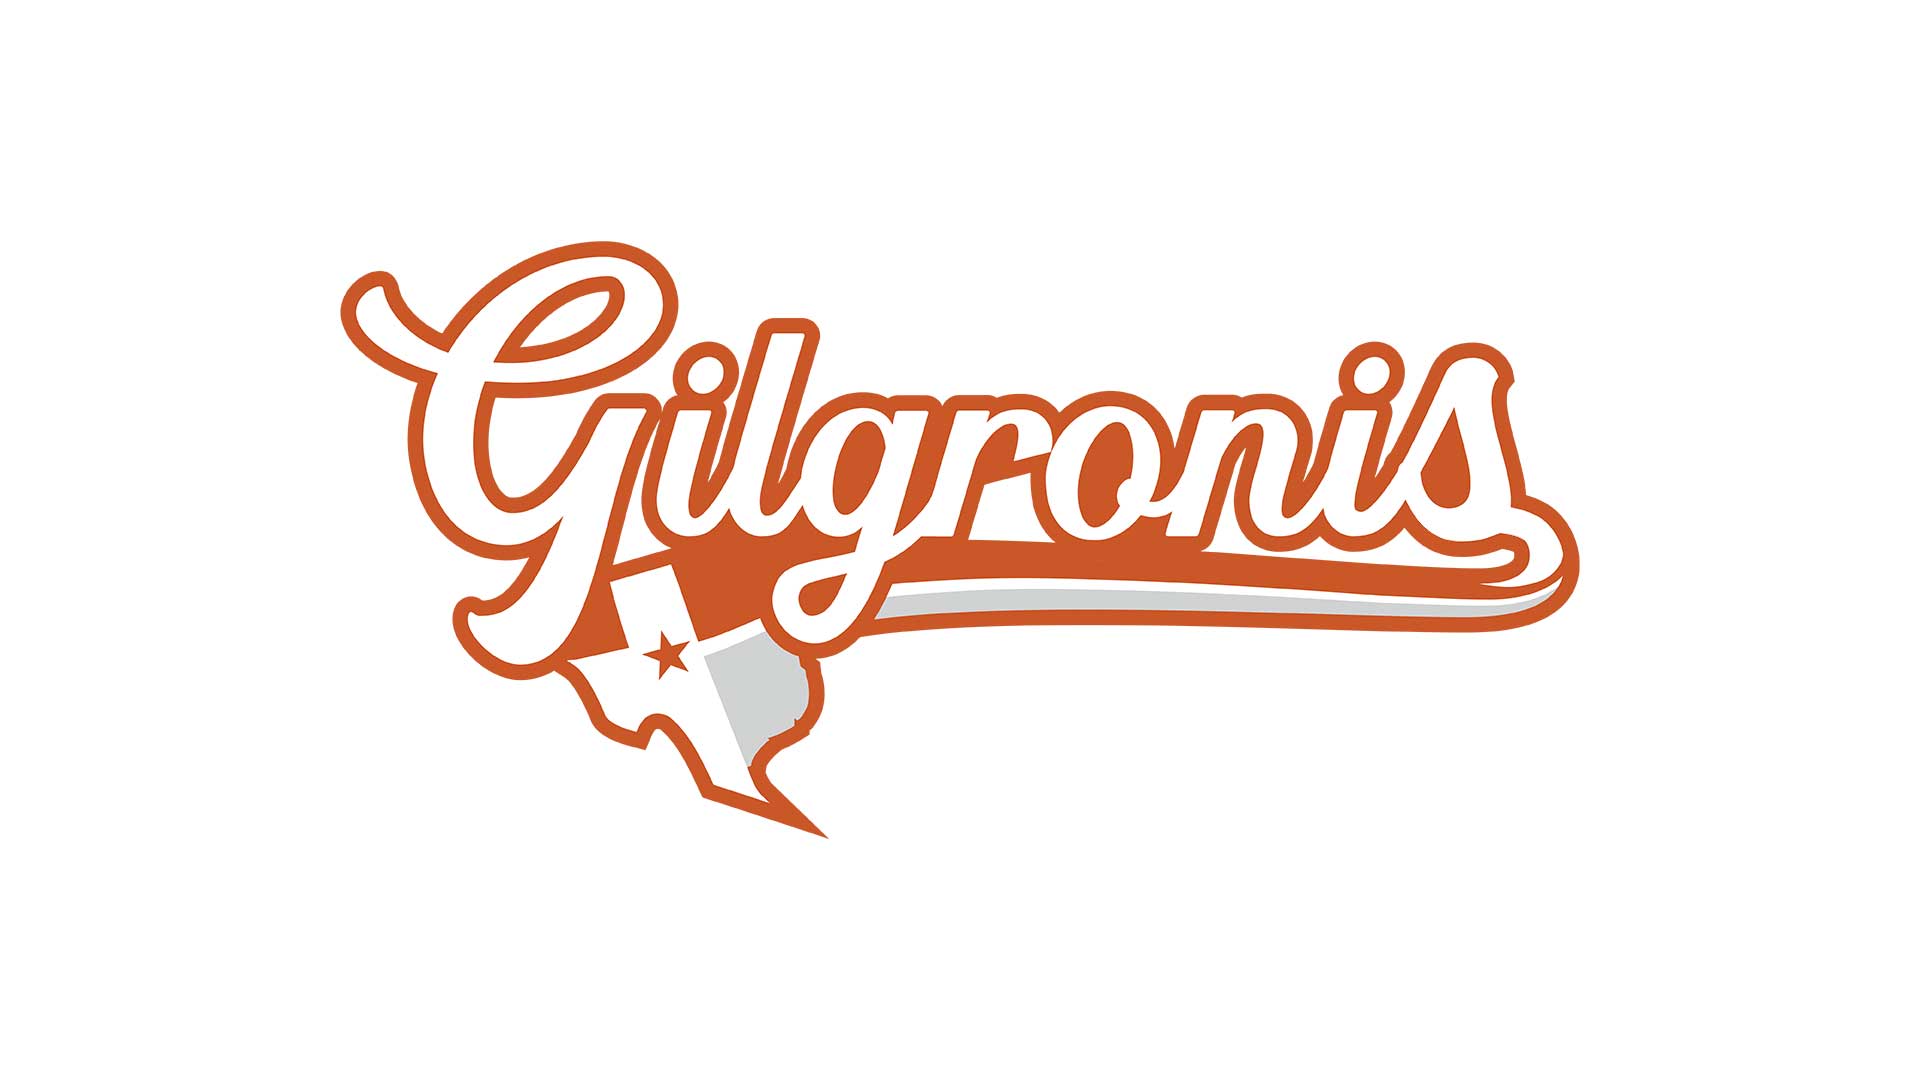 AUSTIN GILGRONIS TAKE ON NEW OWNERSHIP AND FIND NEW HOME AT CIRCUIT OF THE AMERICAS FOR 2020 SEASON